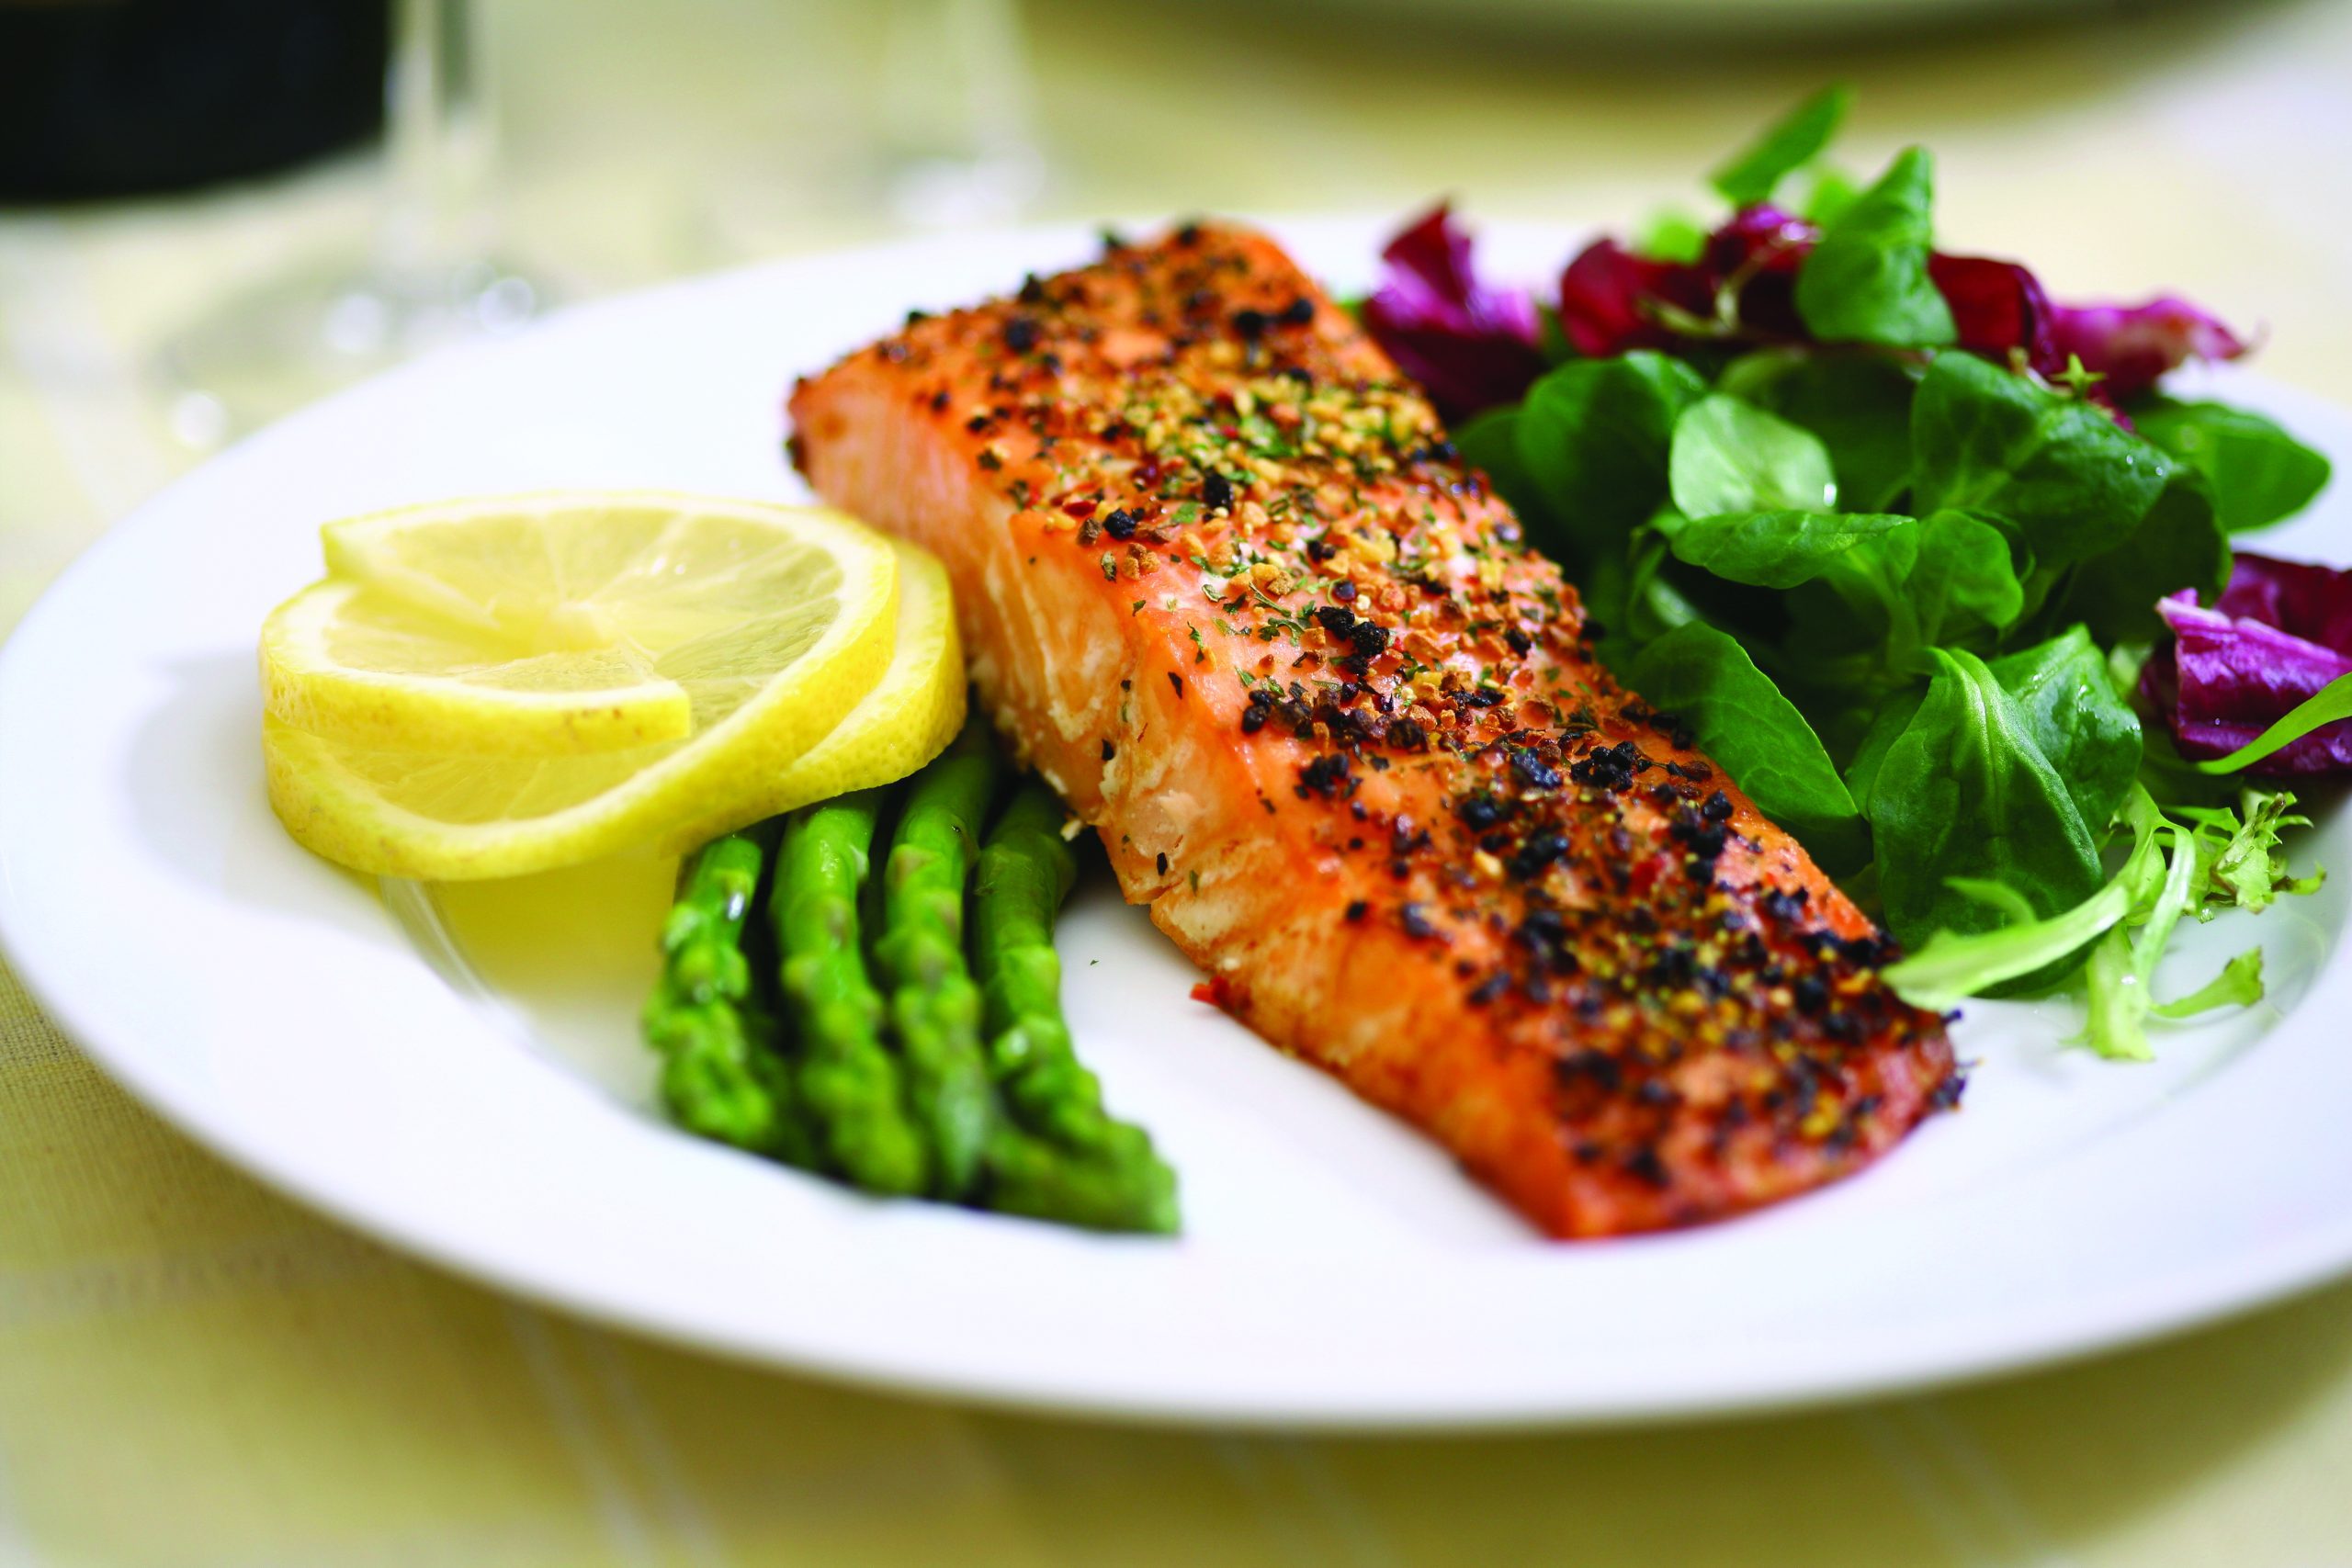 salmon and asparagus and other greens